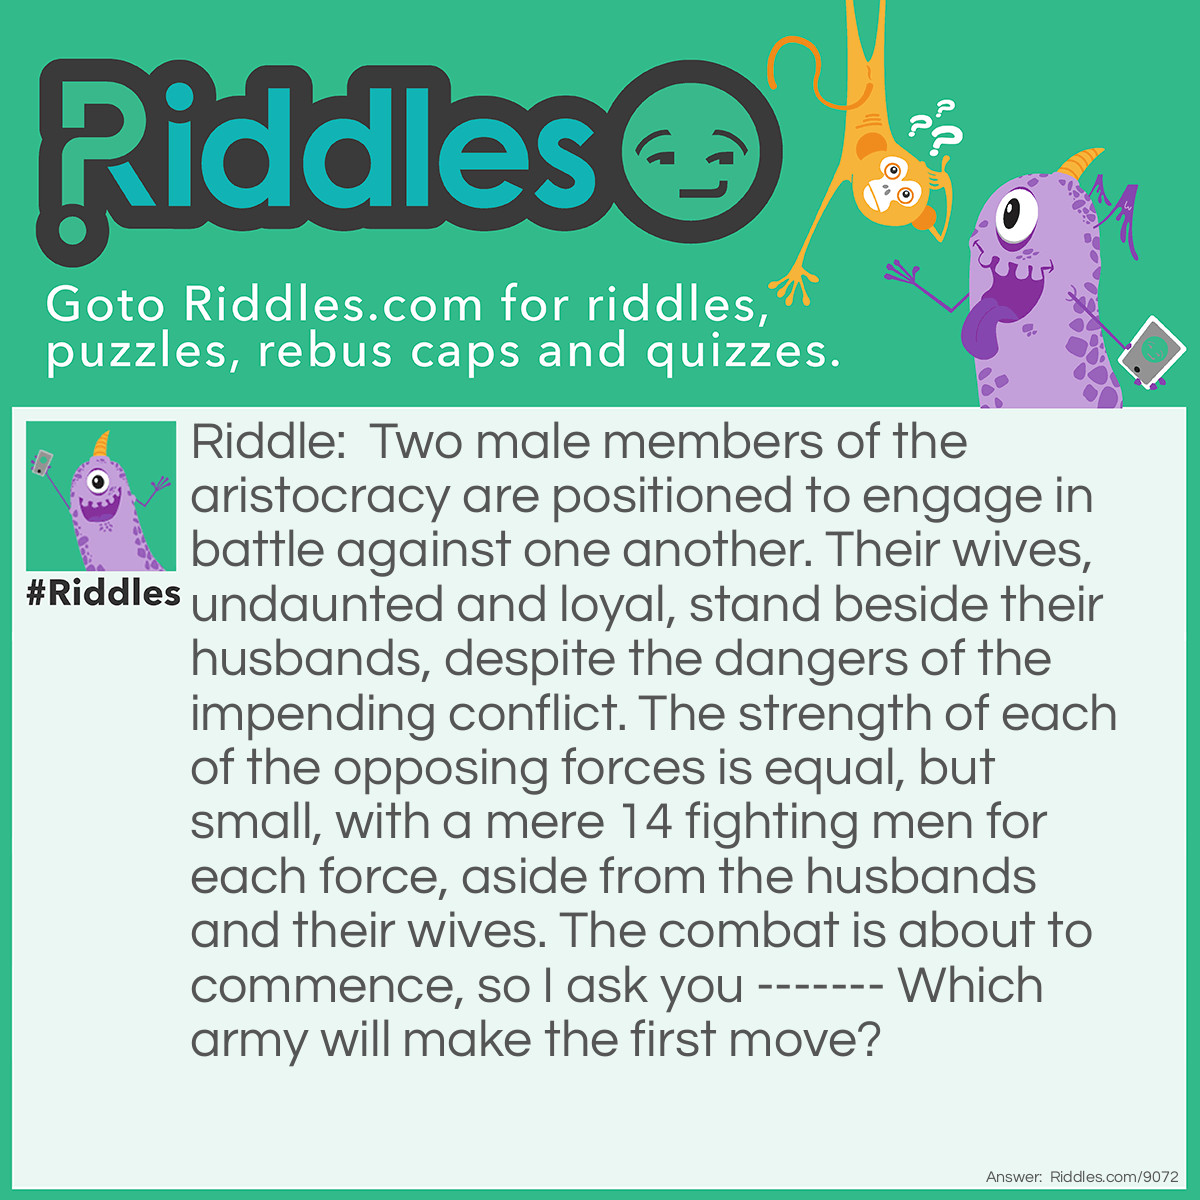 Riddle: Two male members of the aristocracy are positioned to engage in battle against one another. Their wives, undaunted and loyal, stand beside their husbands, despite the dangers of the impending conflict. The strength of each of the opposing forces is equal, but small, with a mere 14 fighting men for each force, aside from the husbands and their wives. The combat is about to commence, so I ask you ------- Which army will make the first move? Answer: The White Army. White always is required to make the first move ----- in a game of chess.